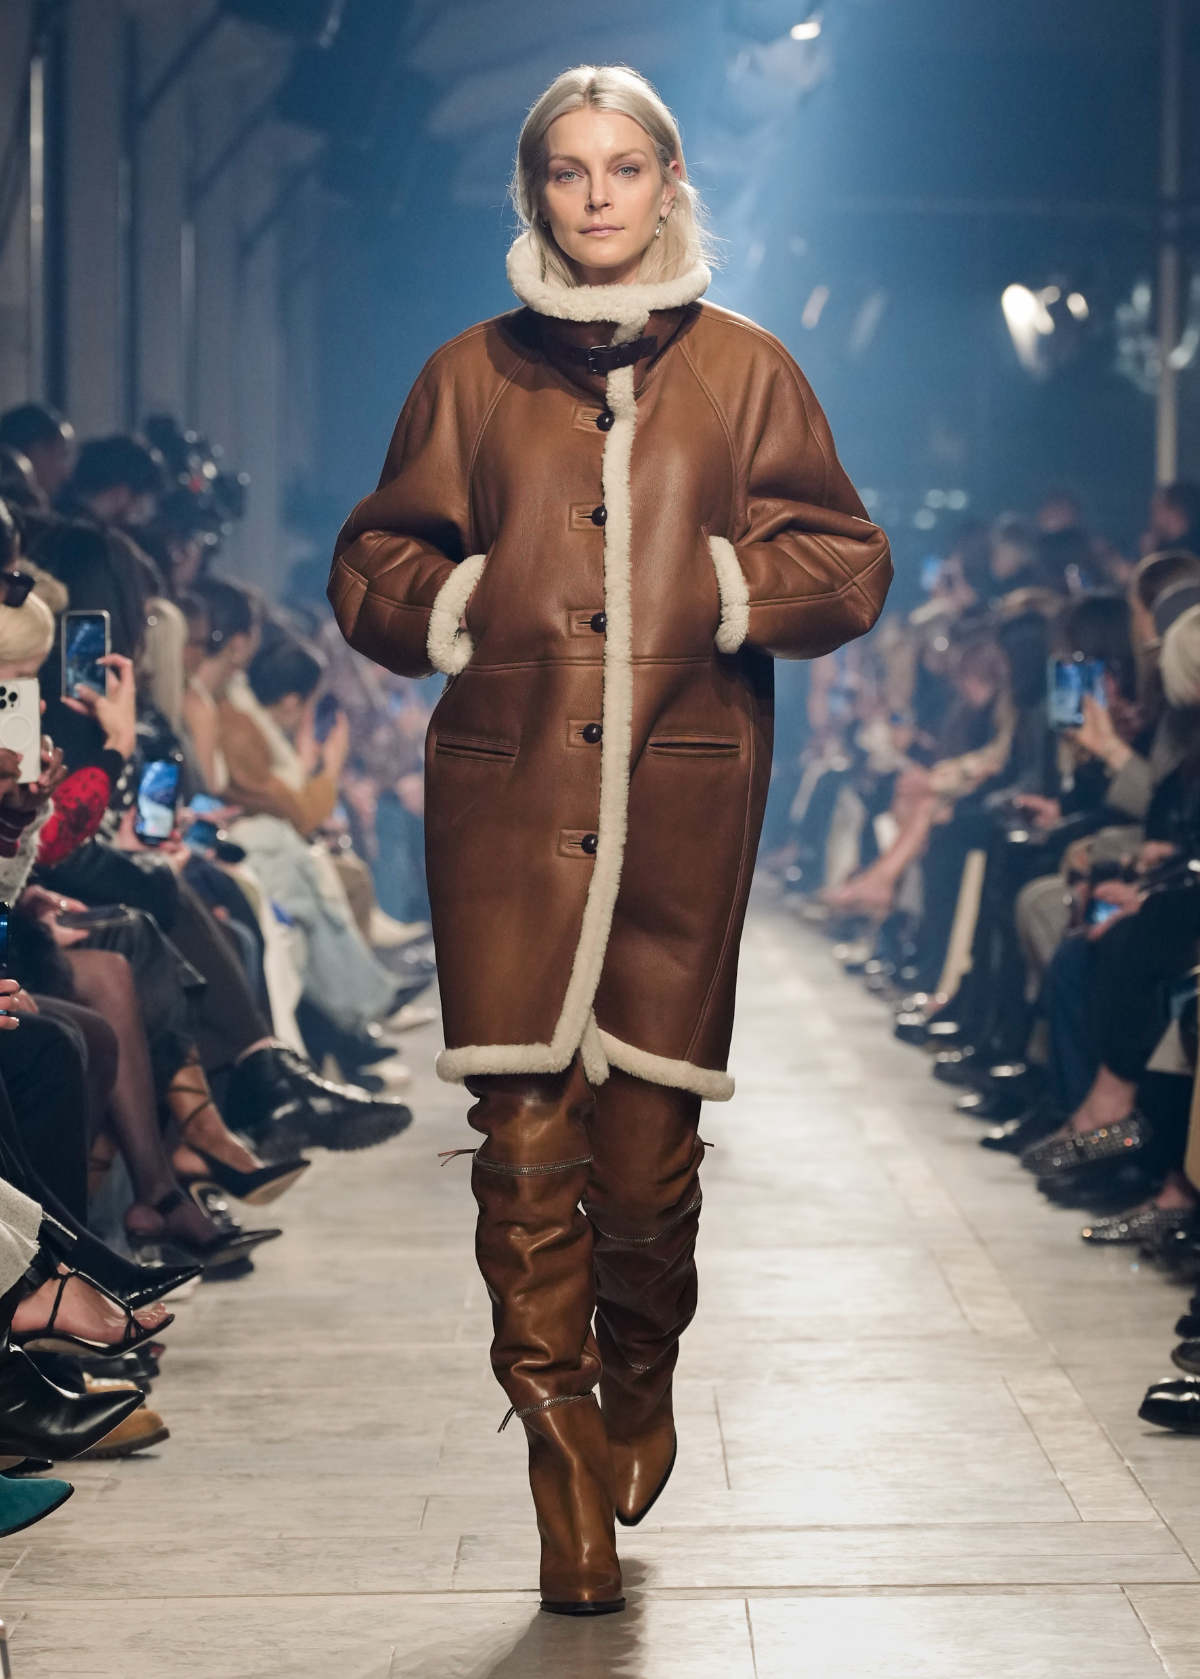 Isabel Marant Presents Its New Fall-Winter 2023 Collection